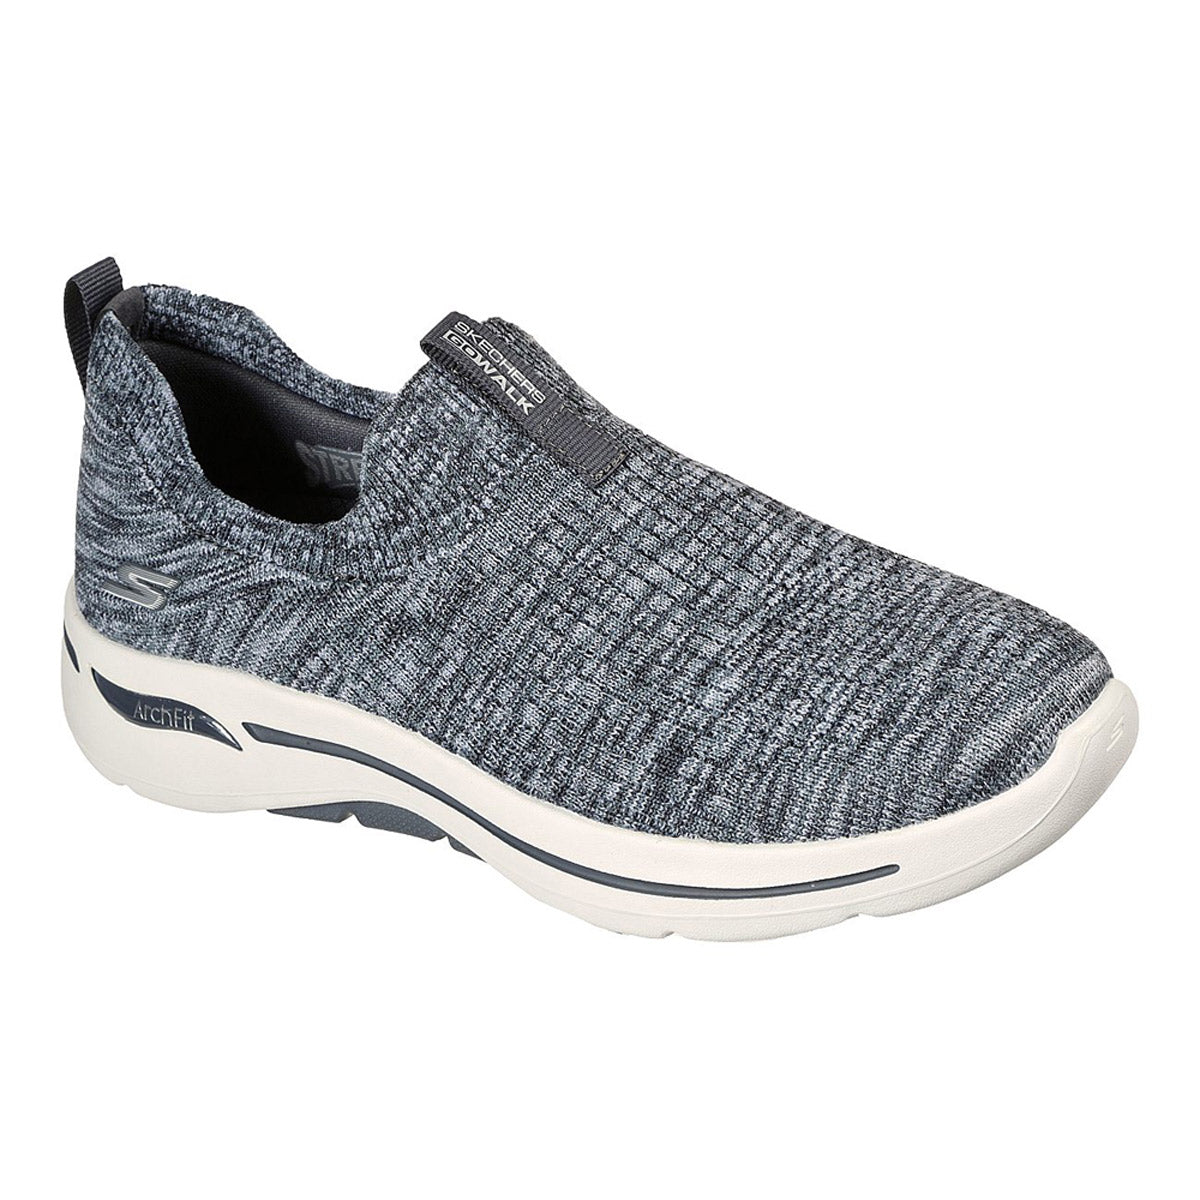 A single grey and blue Skechers Go Walk Arch Fit slip-on sneaker with a knit upper and memory foam insole.